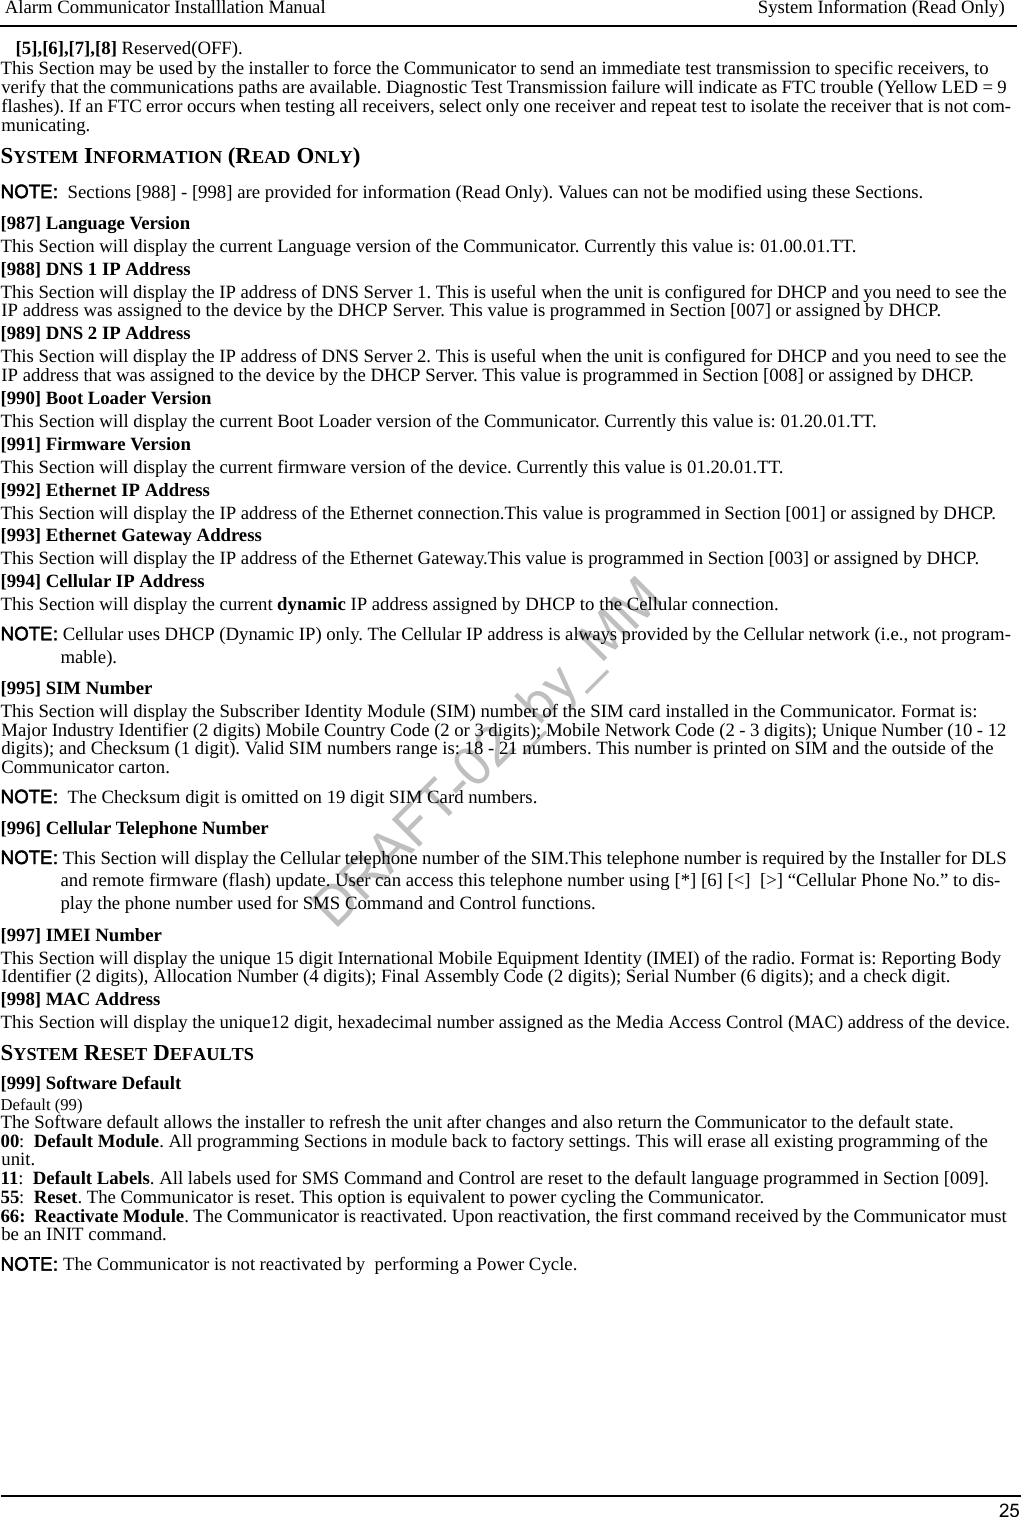 Alarm Communicator Installlation Manual System Information (Read Only)25[5],[6],[7],[8] Reserved(OFF).This Section may be used by the installer to force the Communicator to send an immediate test transmission to specific receivers, to verify that the communications paths are available. Diagnostic Test Transmission failure will indicate as FTC trouble (Yellow LED = 9 flashes). If an FTC error occurs when testing all receivers, select only one receiver and repeat test to isolate the receiver that is not com-municating.SYSTEM INFORMATION (READ ONLY)NOTE:  Sections [988] - [998] are provided for information (Read Only). Values can not be modified using these Sections.[987] Language VersionThis Section will display the current Language version of the Communicator. Currently this value is: 01.00.01.TT.[988] DNS 1 IP AddressThis Section will display the IP address of DNS Server 1. This is useful when the unit is configured for DHCP and you need to see the IP address was assigned to the device by the DHCP Server. This value is programmed in Section [007] or assigned by DHCP.[989] DNS 2 IP AddressThis Section will display the IP address of DNS Server 2. This is useful when the unit is configured for DHCP and you need to see the IP address that was assigned to the device by the DHCP Server. This value is programmed in Section [008] or assigned by DHCP.[990] Boot Loader VersionThis Section will display the current Boot Loader version of the Communicator. Currently this value is: 01.20.01.TT.[991] Firmware VersionThis Section will display the current firmware version of the device. Currently this value is 01.20.01.TT.[992] Ethernet IP Address This Section will display the IP address of the Ethernet connection.This value is programmed in Section [001] or assigned by DHCP.[993] Ethernet Gateway Address This Section will display the IP address of the Ethernet Gateway.This value is programmed in Section [003] or assigned by DHCP.[994] Cellular IP AddressThis Section will display the current dynamic IP address assigned by DHCP to the Cellular connection.NOTE: Cellular uses DHCP (Dynamic IP) only. The Cellular IP address is always provided by the Cellular network (i.e., not program-mable).[995] SIM NumberThis Section will display the Subscriber Identity Module (SIM) number of the SIM card installed in the Communicator. Format is: Major Industry Identifier (2 digits) Mobile Country Code (2 or 3 digits); Mobile Network Code (2 - 3 digits); Unique Number (10 - 12 digits); and Checksum (1 digit). Valid SIM numbers range is: 18 - 21 numbers. This number is printed on SIM and the outside of the Communicator carton.NOTE:  The Checksum digit is omitted on 19 digit SIM Card numbers.[996] Cellular Telephone NumberNOTE: This Section will display the Cellular telephone number of the SIM.This telephone number is required by the Installer for DLS and remote firmware (flash) update. User can access this telephone number using [*] [6] [&lt;]  [&gt;] “Cellular Phone No.” to dis-play the phone number used for SMS Command and Control functions.[997] IMEI NumberThis Section will display the unique 15 digit International Mobile Equipment Identity (IMEI) of the radio. Format is: Reporting Body Identifier (2 digits), Allocation Number (4 digits); Final Assembly Code (2 digits); Serial Number (6 digits); and a check digit.[998] MAC AddressThis Section will display the unique12 digit, hexadecimal number assigned as the Media Access Control (MAC) address of the device.SYSTEM RESET DEFAULTS[999] Software DefaultDefault (99)The Software default allows the installer to refresh the unit after changes and also return the Communicator to the default state. 00:  Default Module. All programming Sections in module back to factory settings. This will erase all existing programming of the unit.11:  Default Labels. All labels used for SMS Command and Control are reset to the default language programmed in Section [009].55:  Reset. The Communicator is reset. This option is equivalent to power cycling the Communicator.66:  Reactivate Module. The Communicator is reactivated. Upon reactivation, the first command received by the Communicator must be an INIT command.NOTE: The Communicator is not reactivated by  performing a Power Cycle.DRAFT-02_by_MM